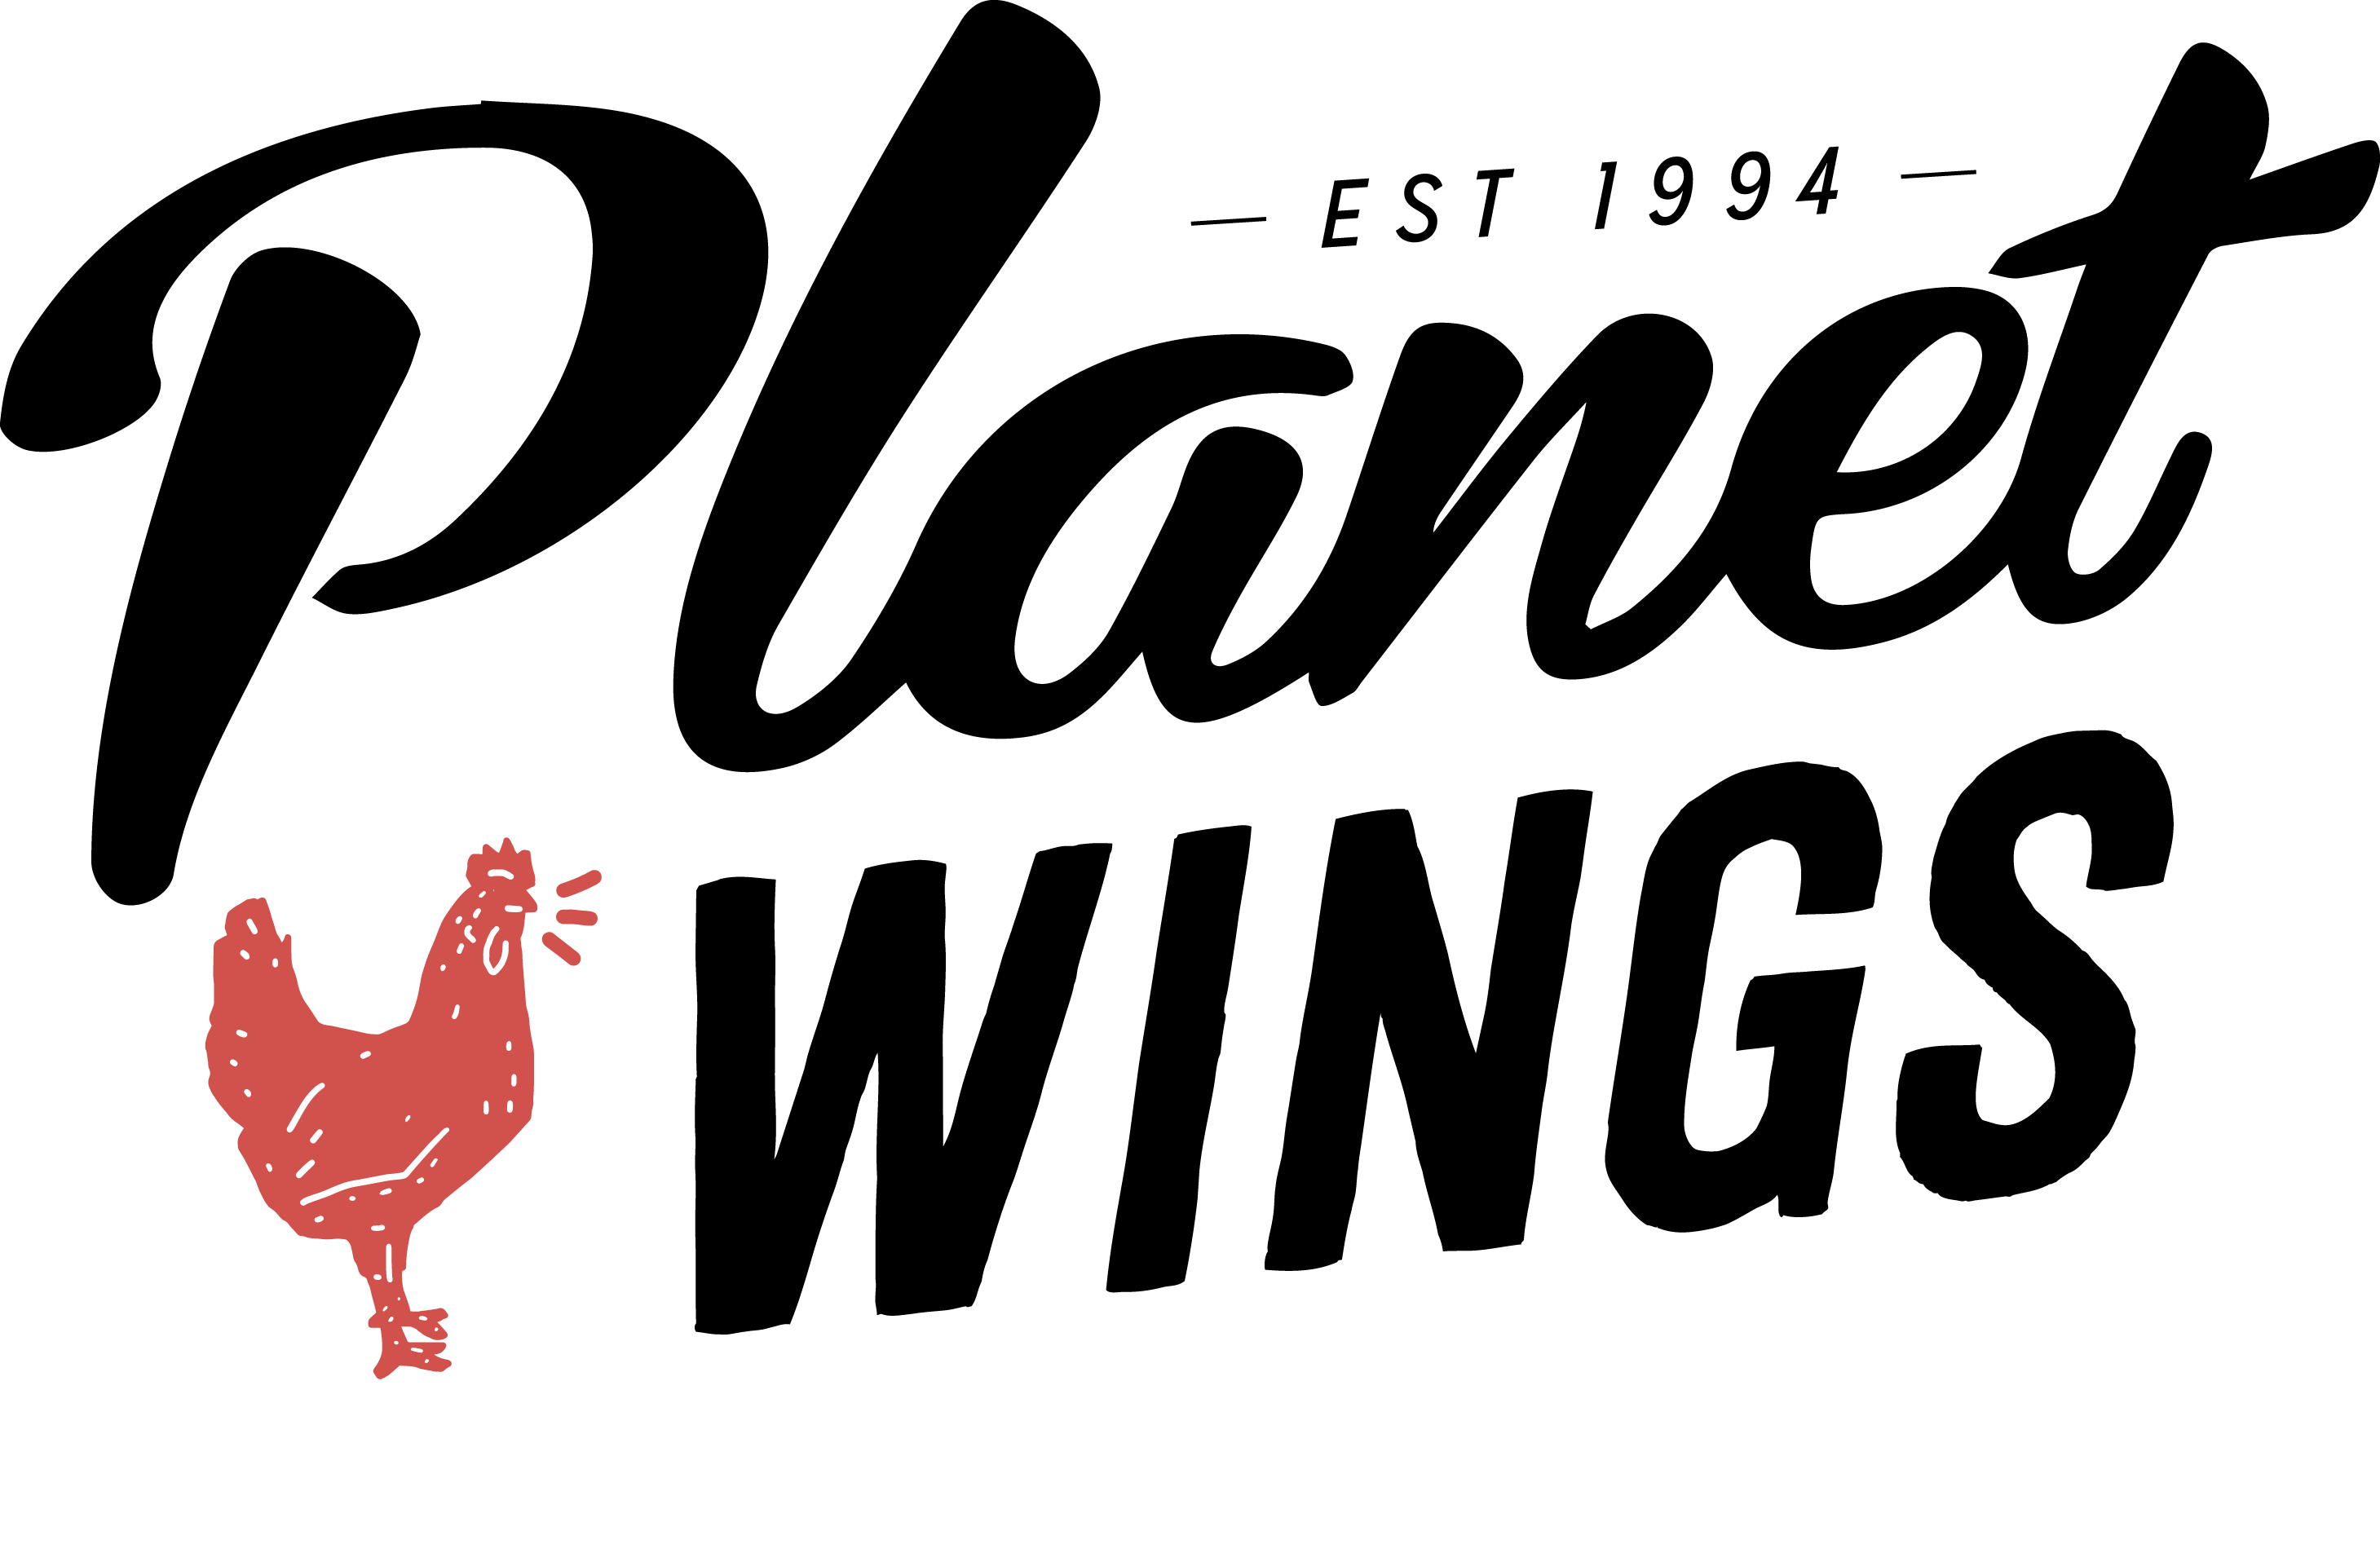 Hot Wing Logo - Planet Wings - Crave Flavor - Chicken Wings